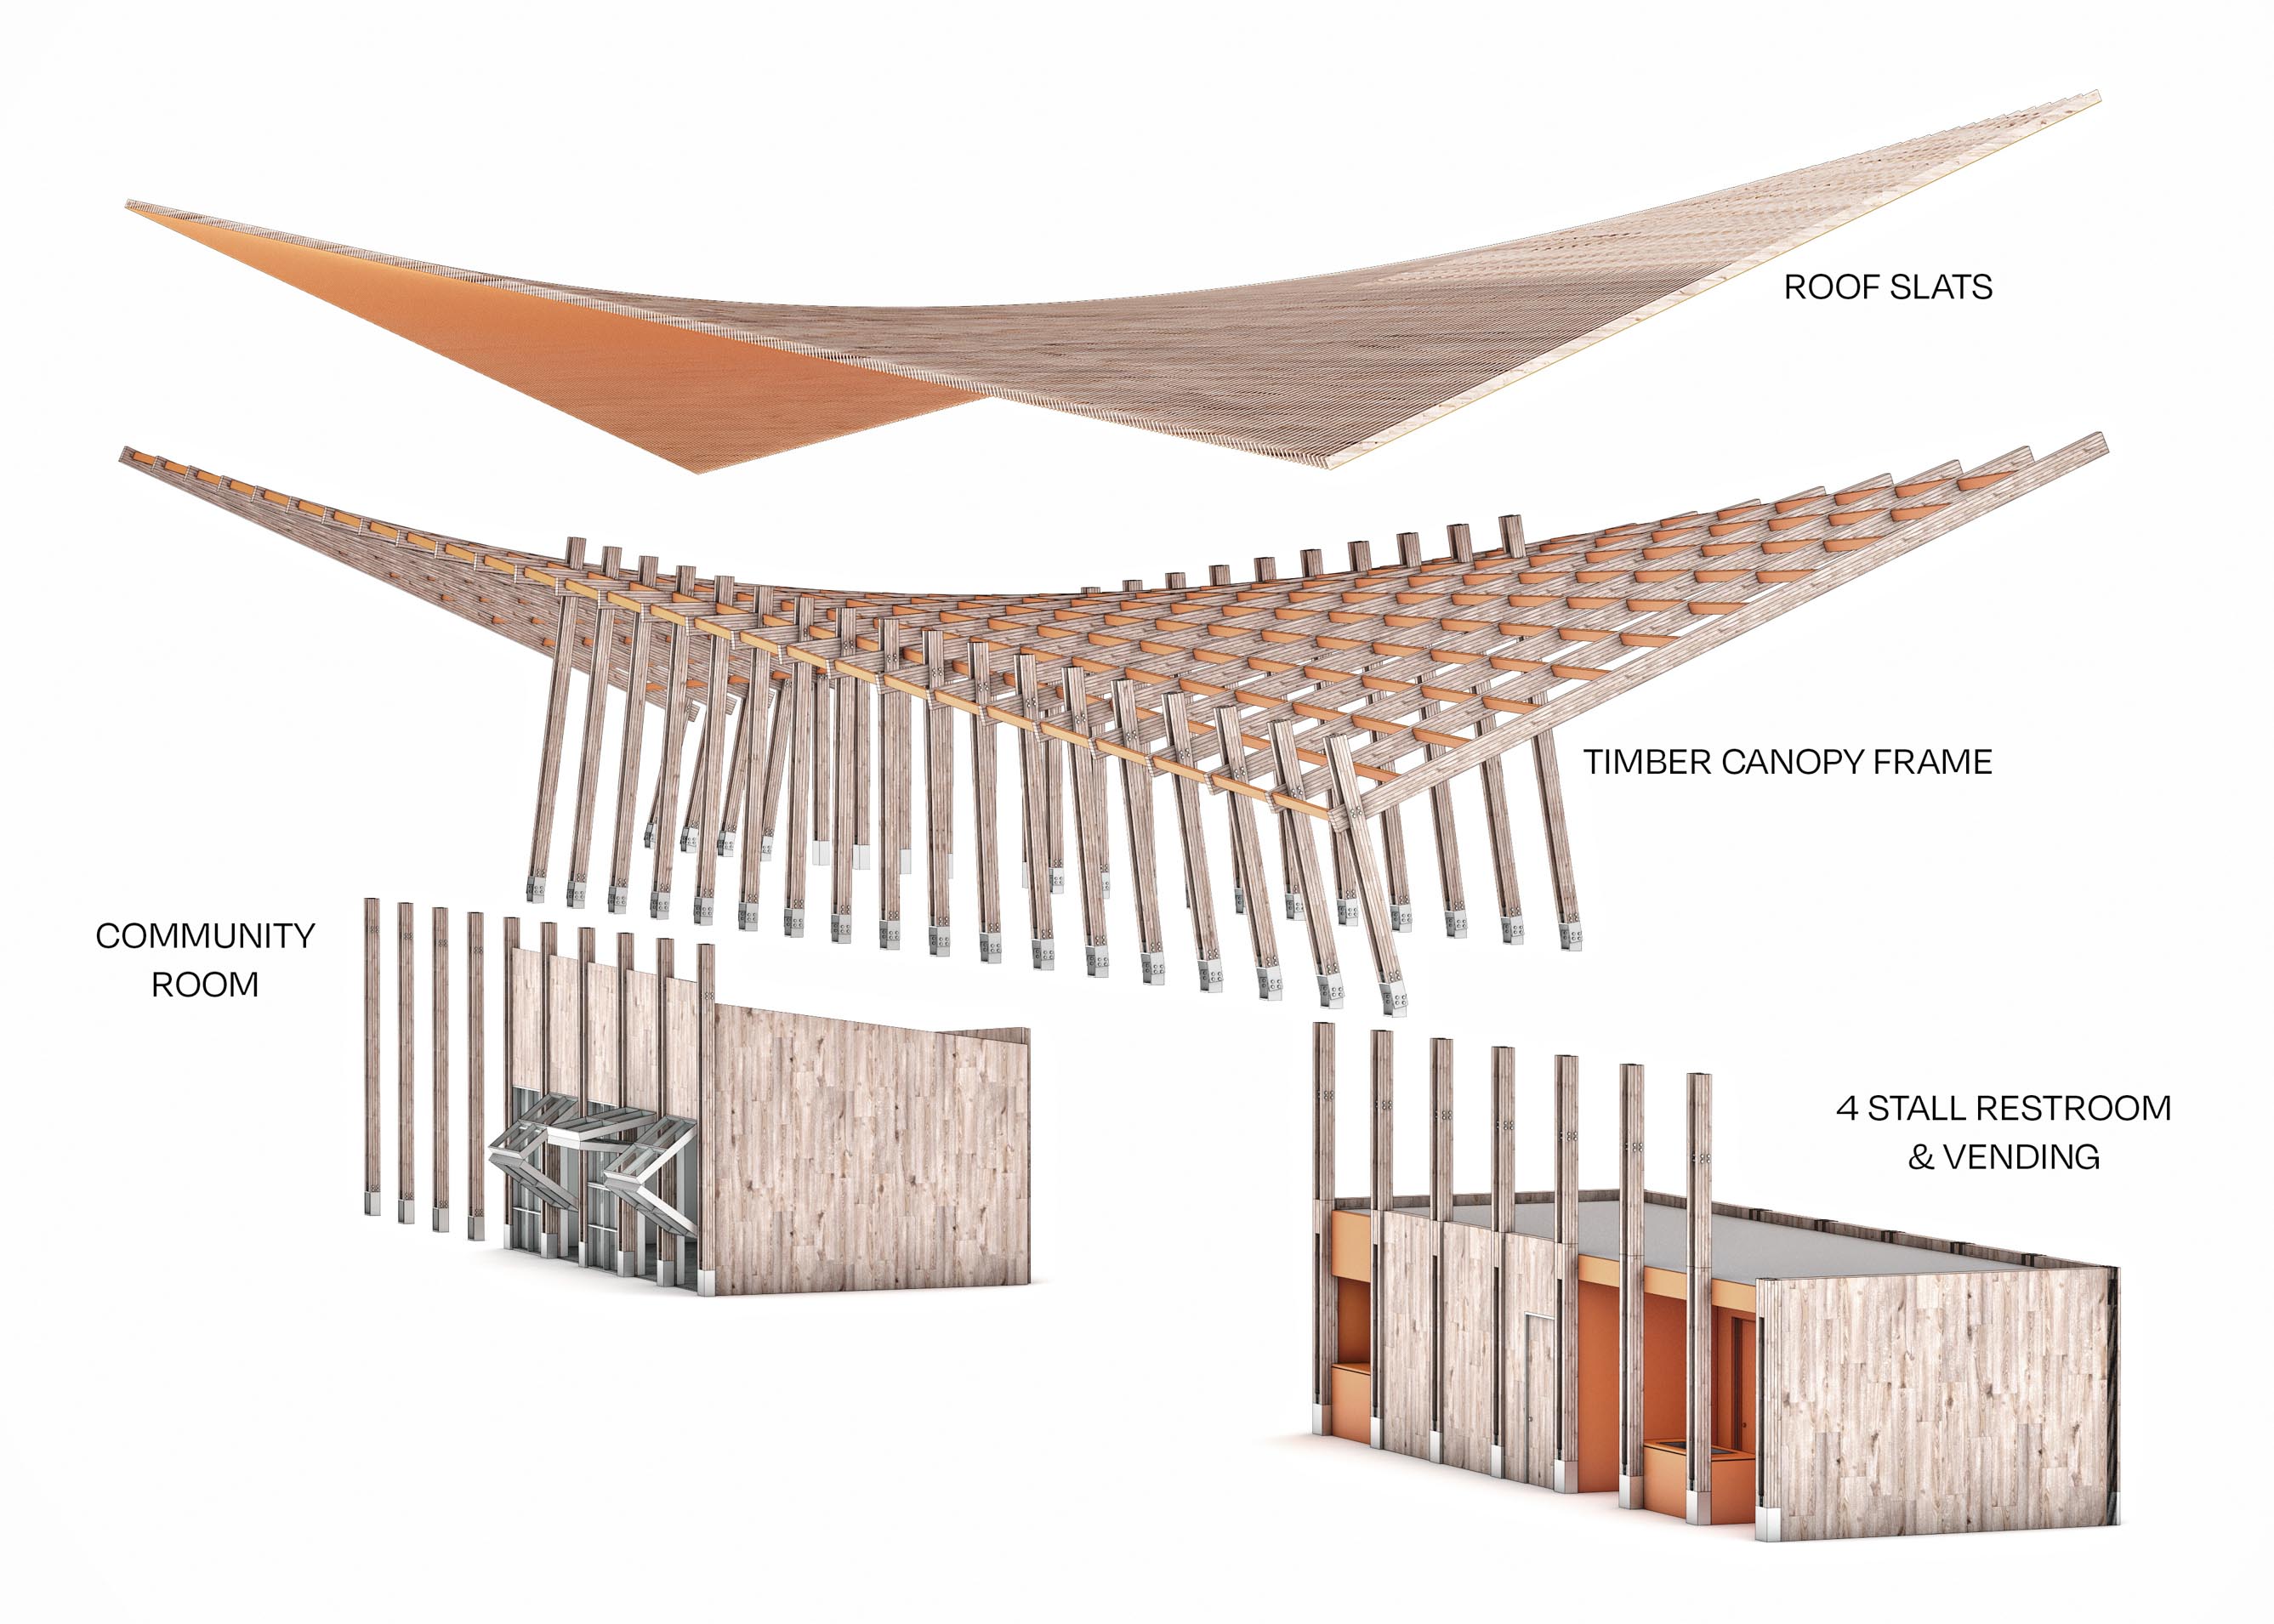 Diagram of the roofs slats and timber canopy frame